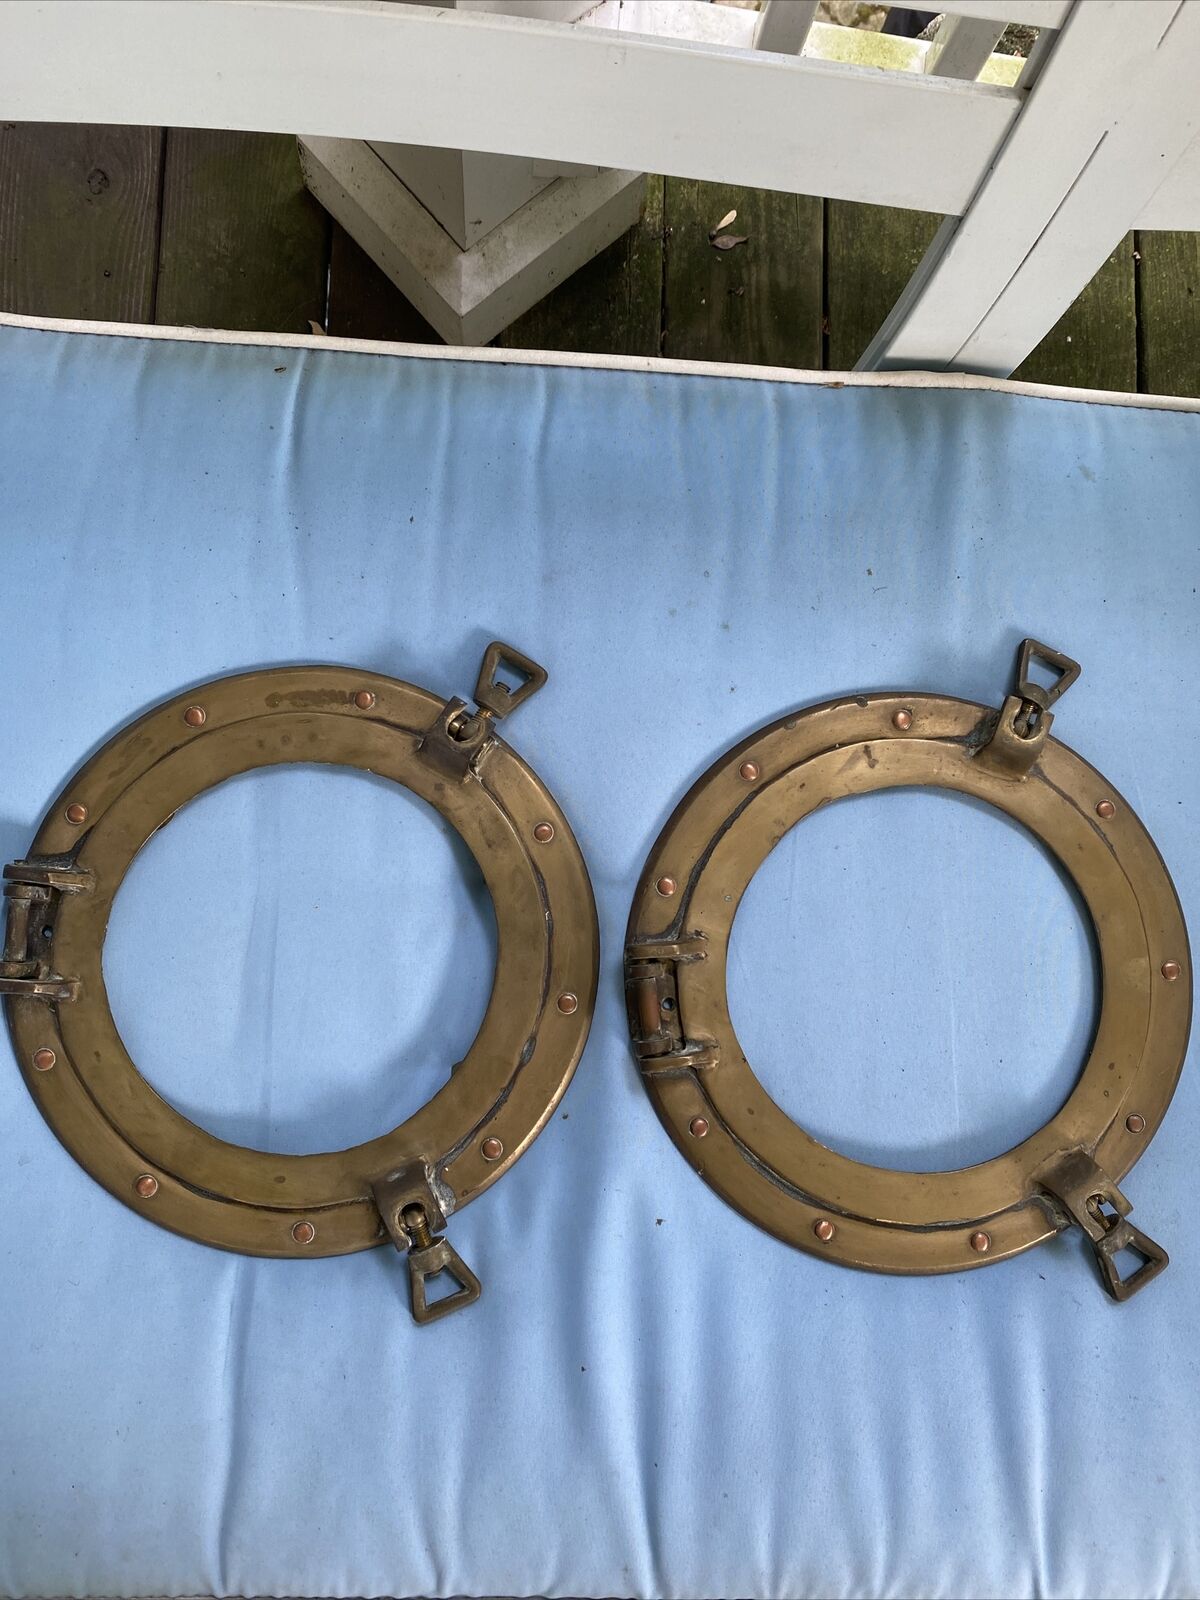 Brass Ship’s Portholes 2. With Removable Mirrors Cool! Free Shipping To Conus